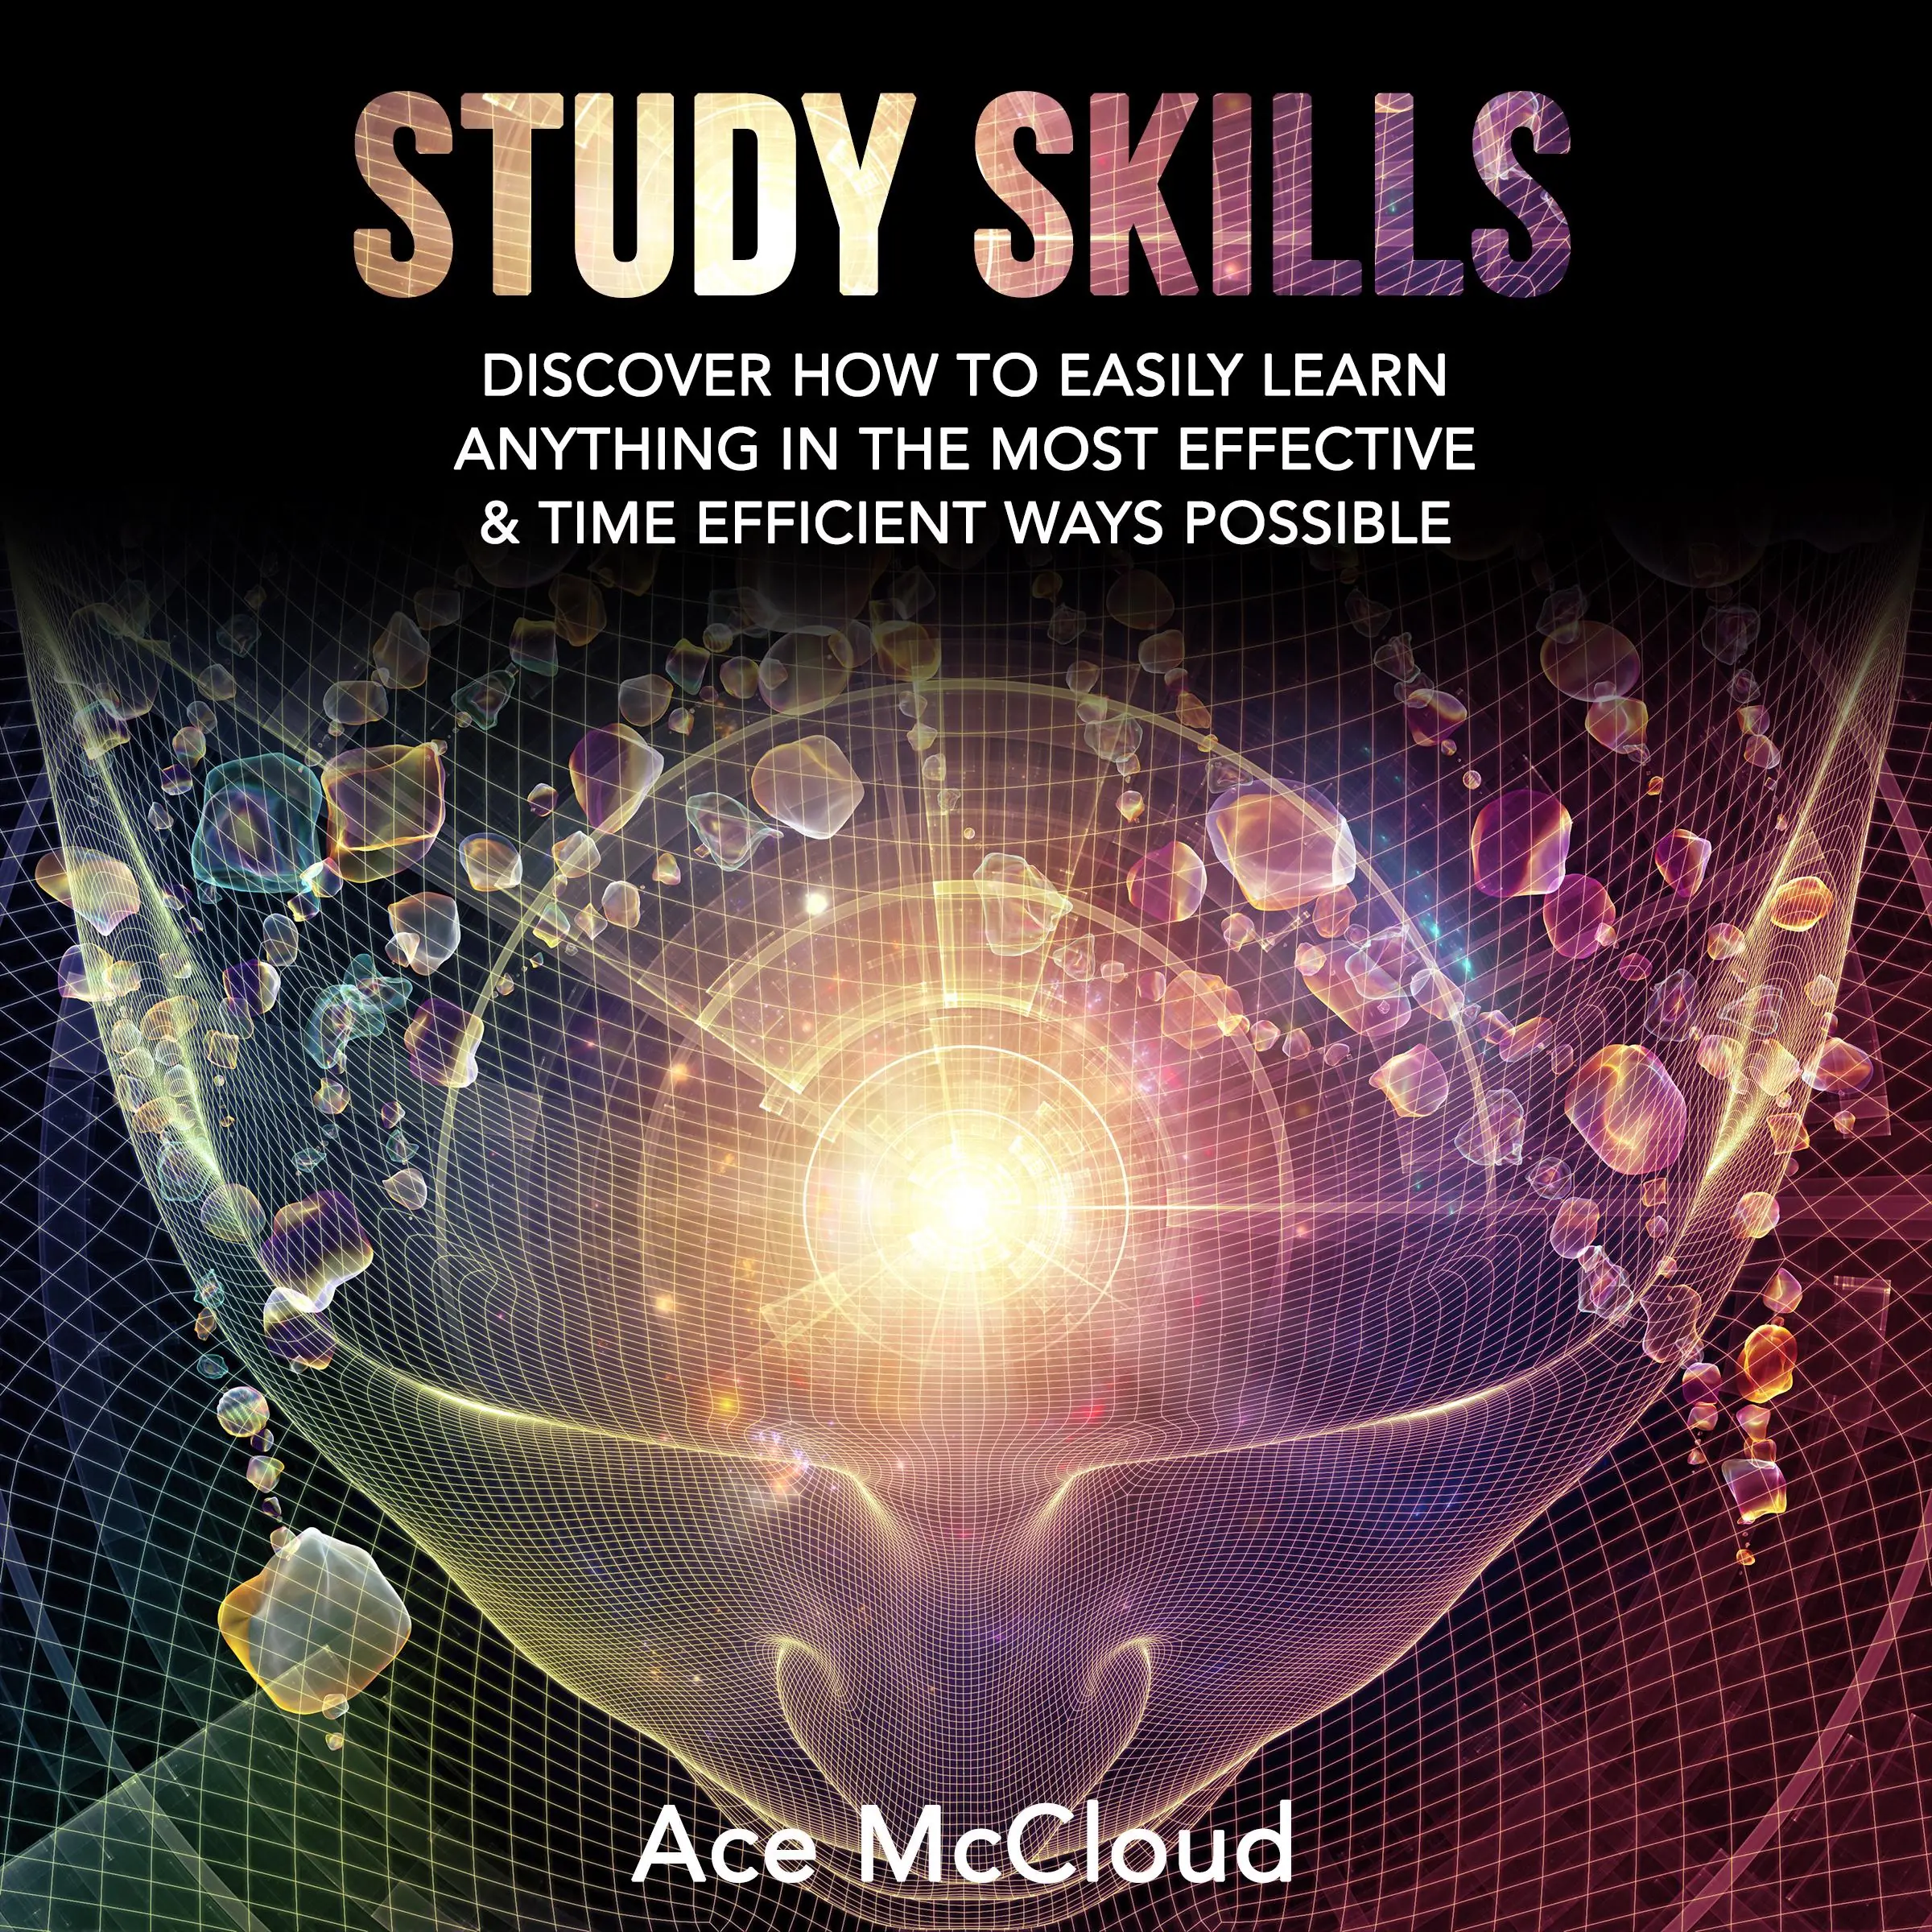 Study Skills: Discover How To Easily Learn Anything In The Most Effective & Time Efficient Ways Possible Audiobook by Ace McCloud